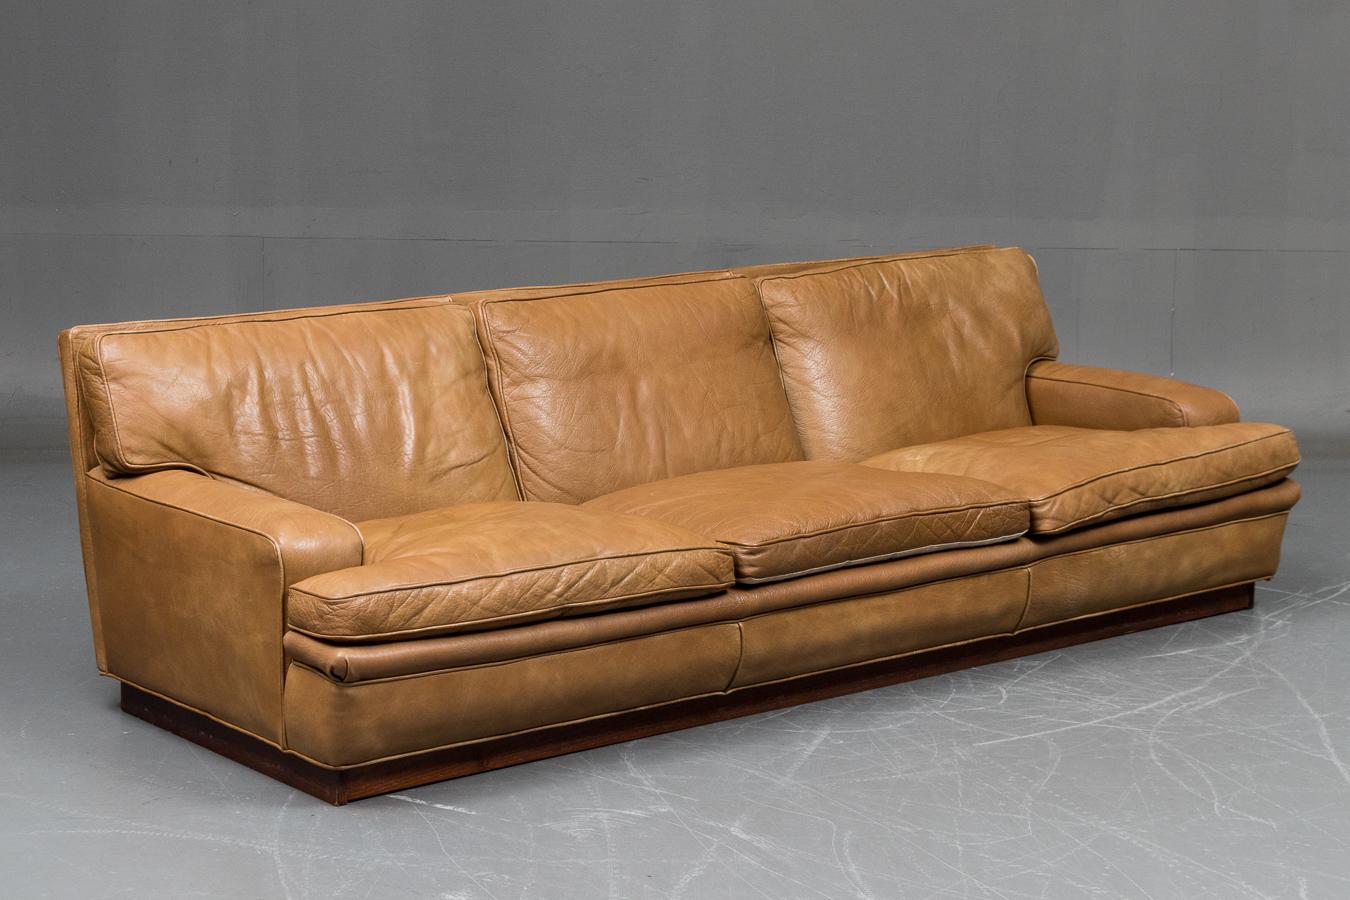 Fantastic 3-seat sofa designed by Arne Norell in the late 1960's as Model Mexico. The model was produced trough the 1970's and 80's. Made from Buffalo hide that remains very supple and with nice patina and only minimal wear. The padding remains soft